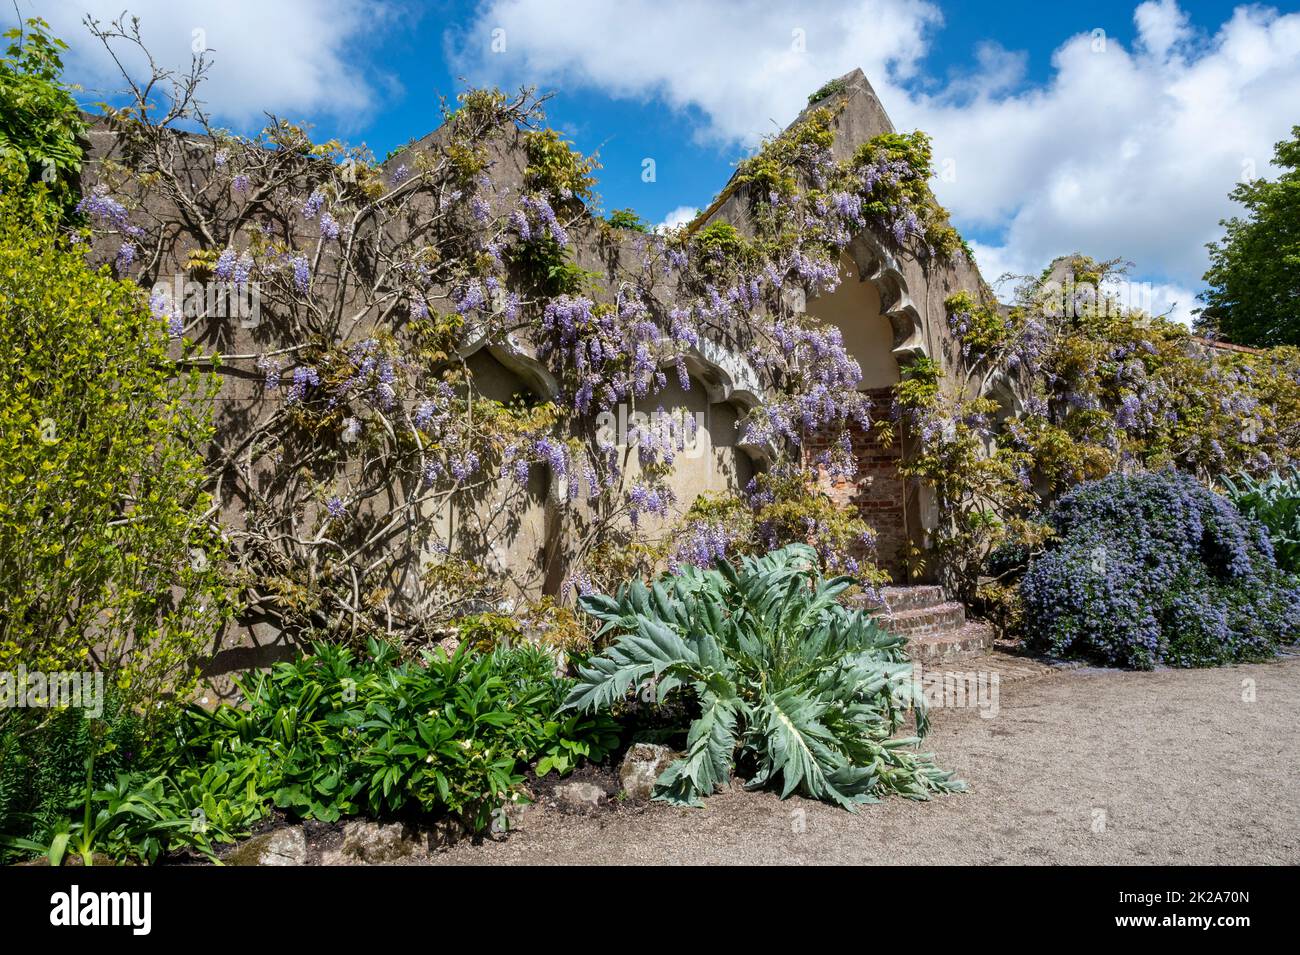 Wisteria in flower during spring along an ornate border at Pencarrow House and Gardens, Cornwall, UK Stock Photo